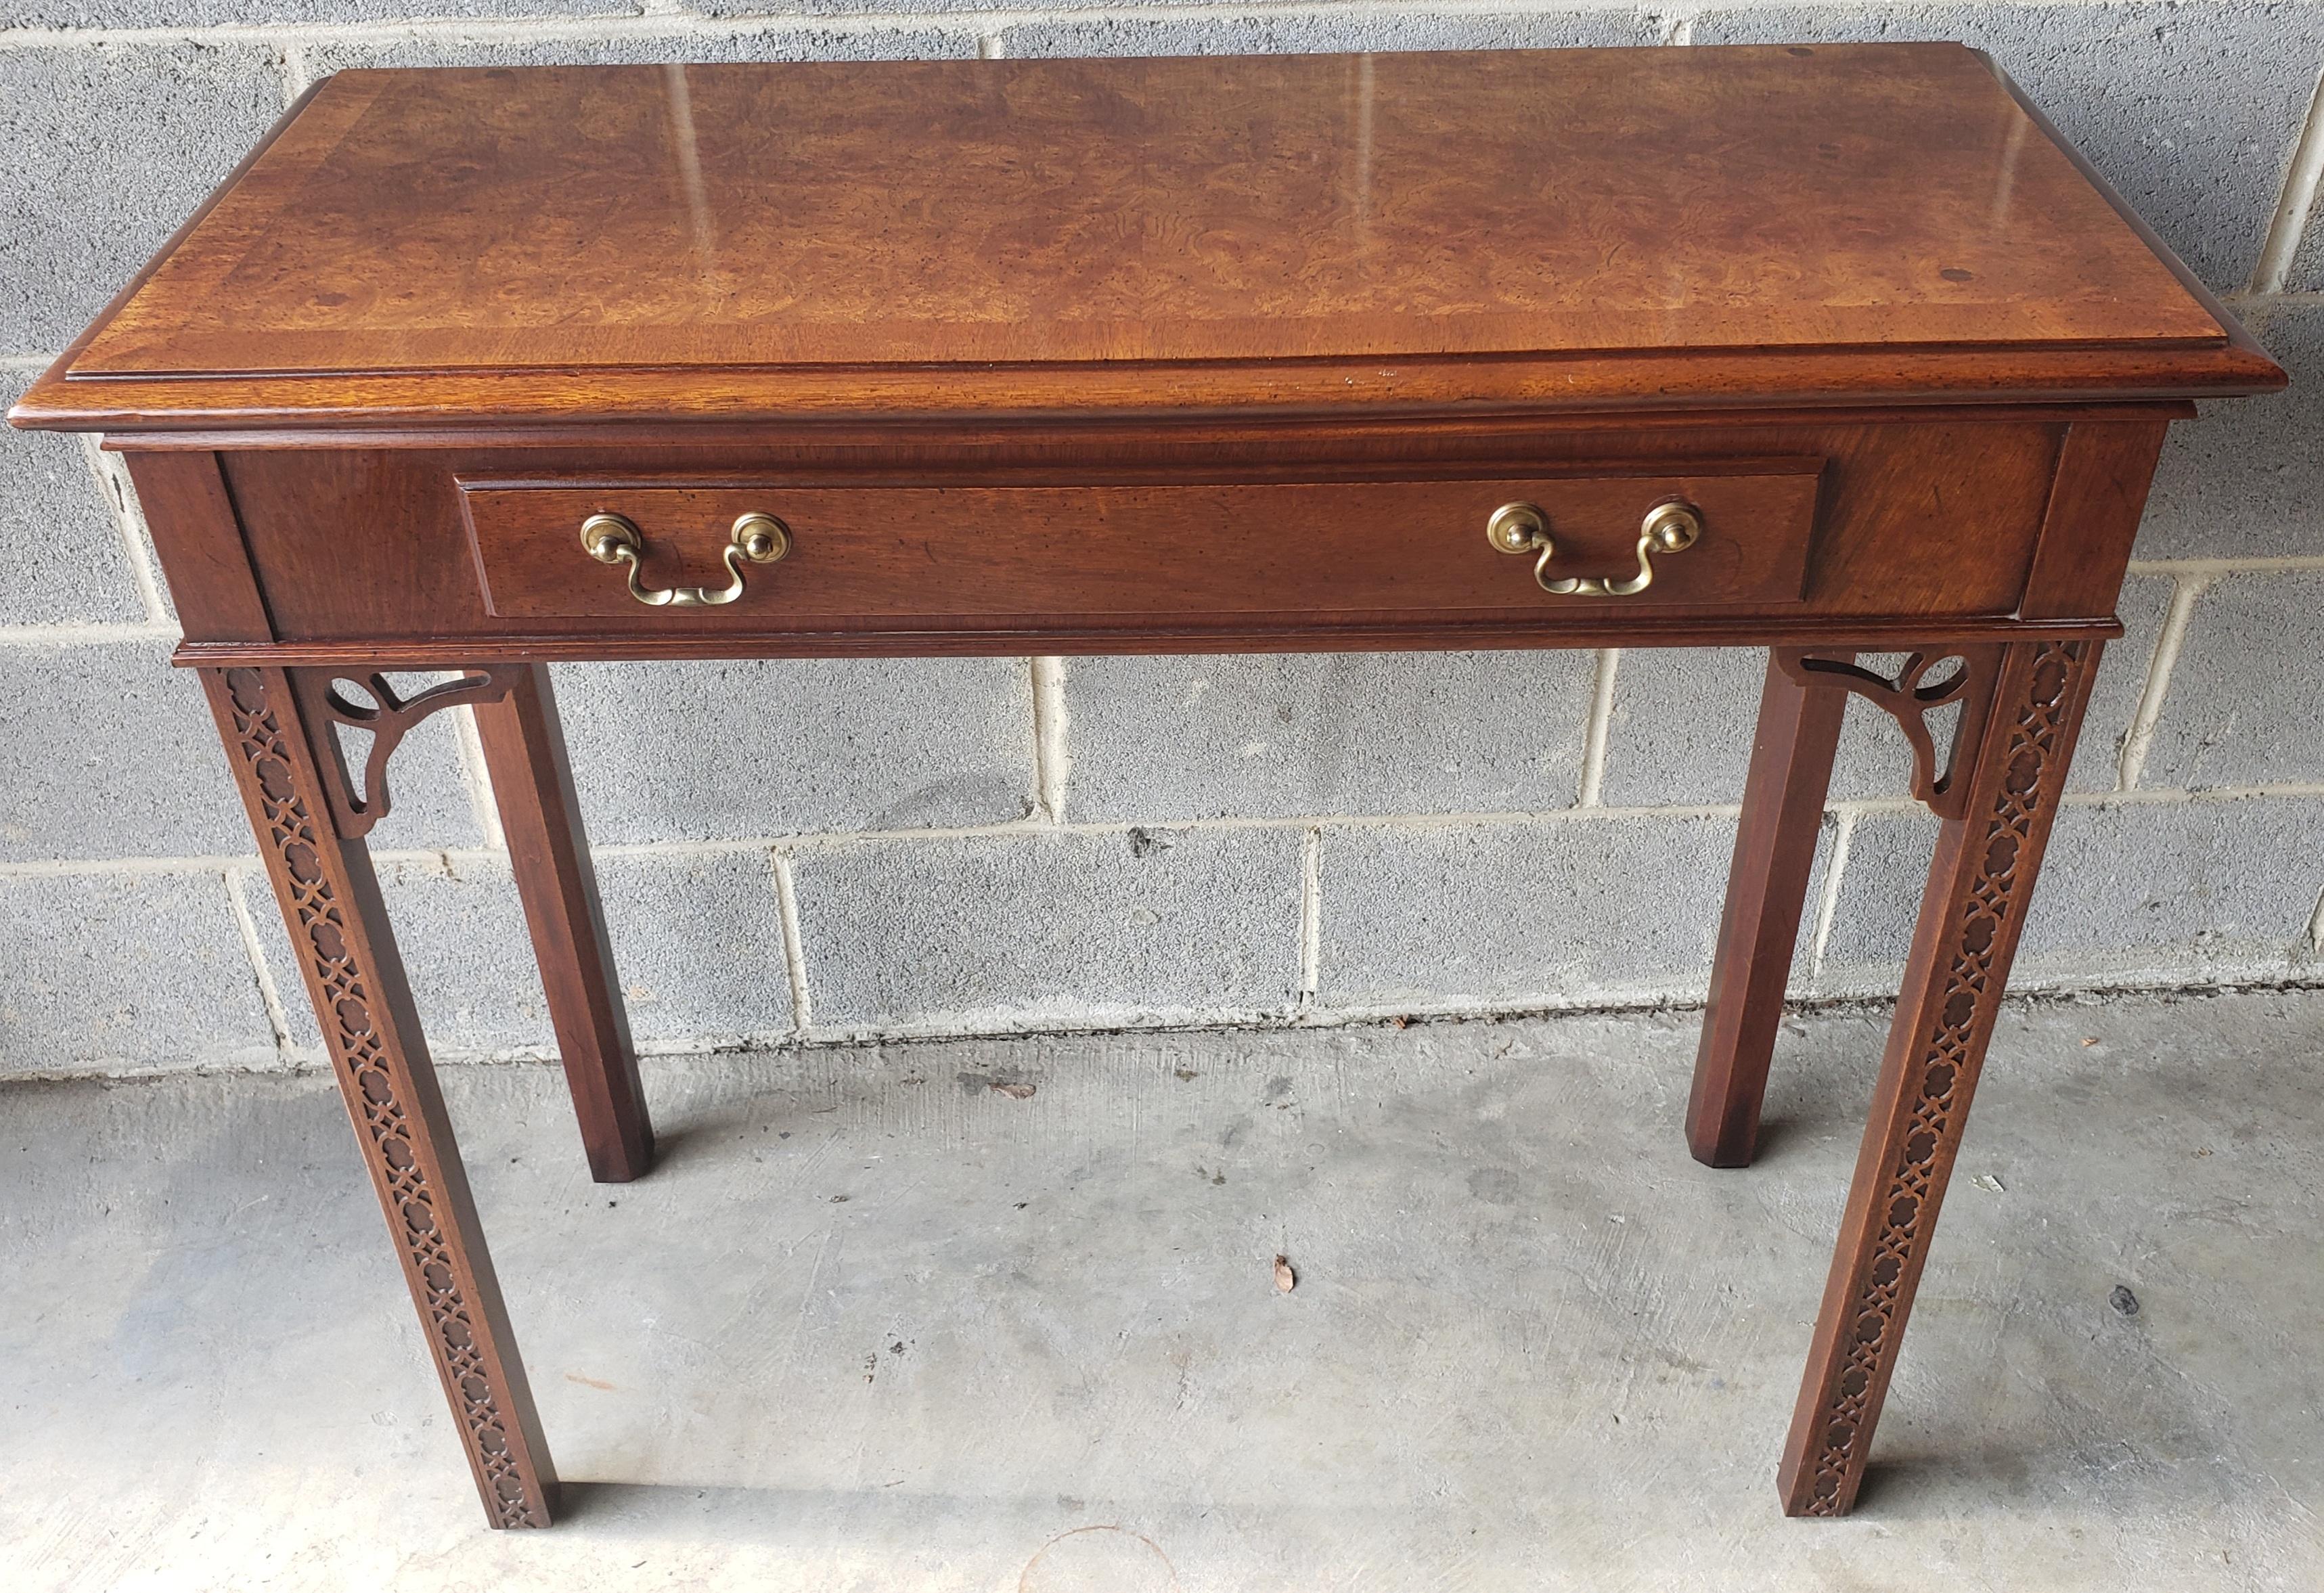 1970s Chippendale walnut burl console table with fretwork and banded top. Amazing fretwork on legs. Large drawer with two original brass drop down pulls. Walnut burl and banded top
Excellent vintage condition.
Measures: 36